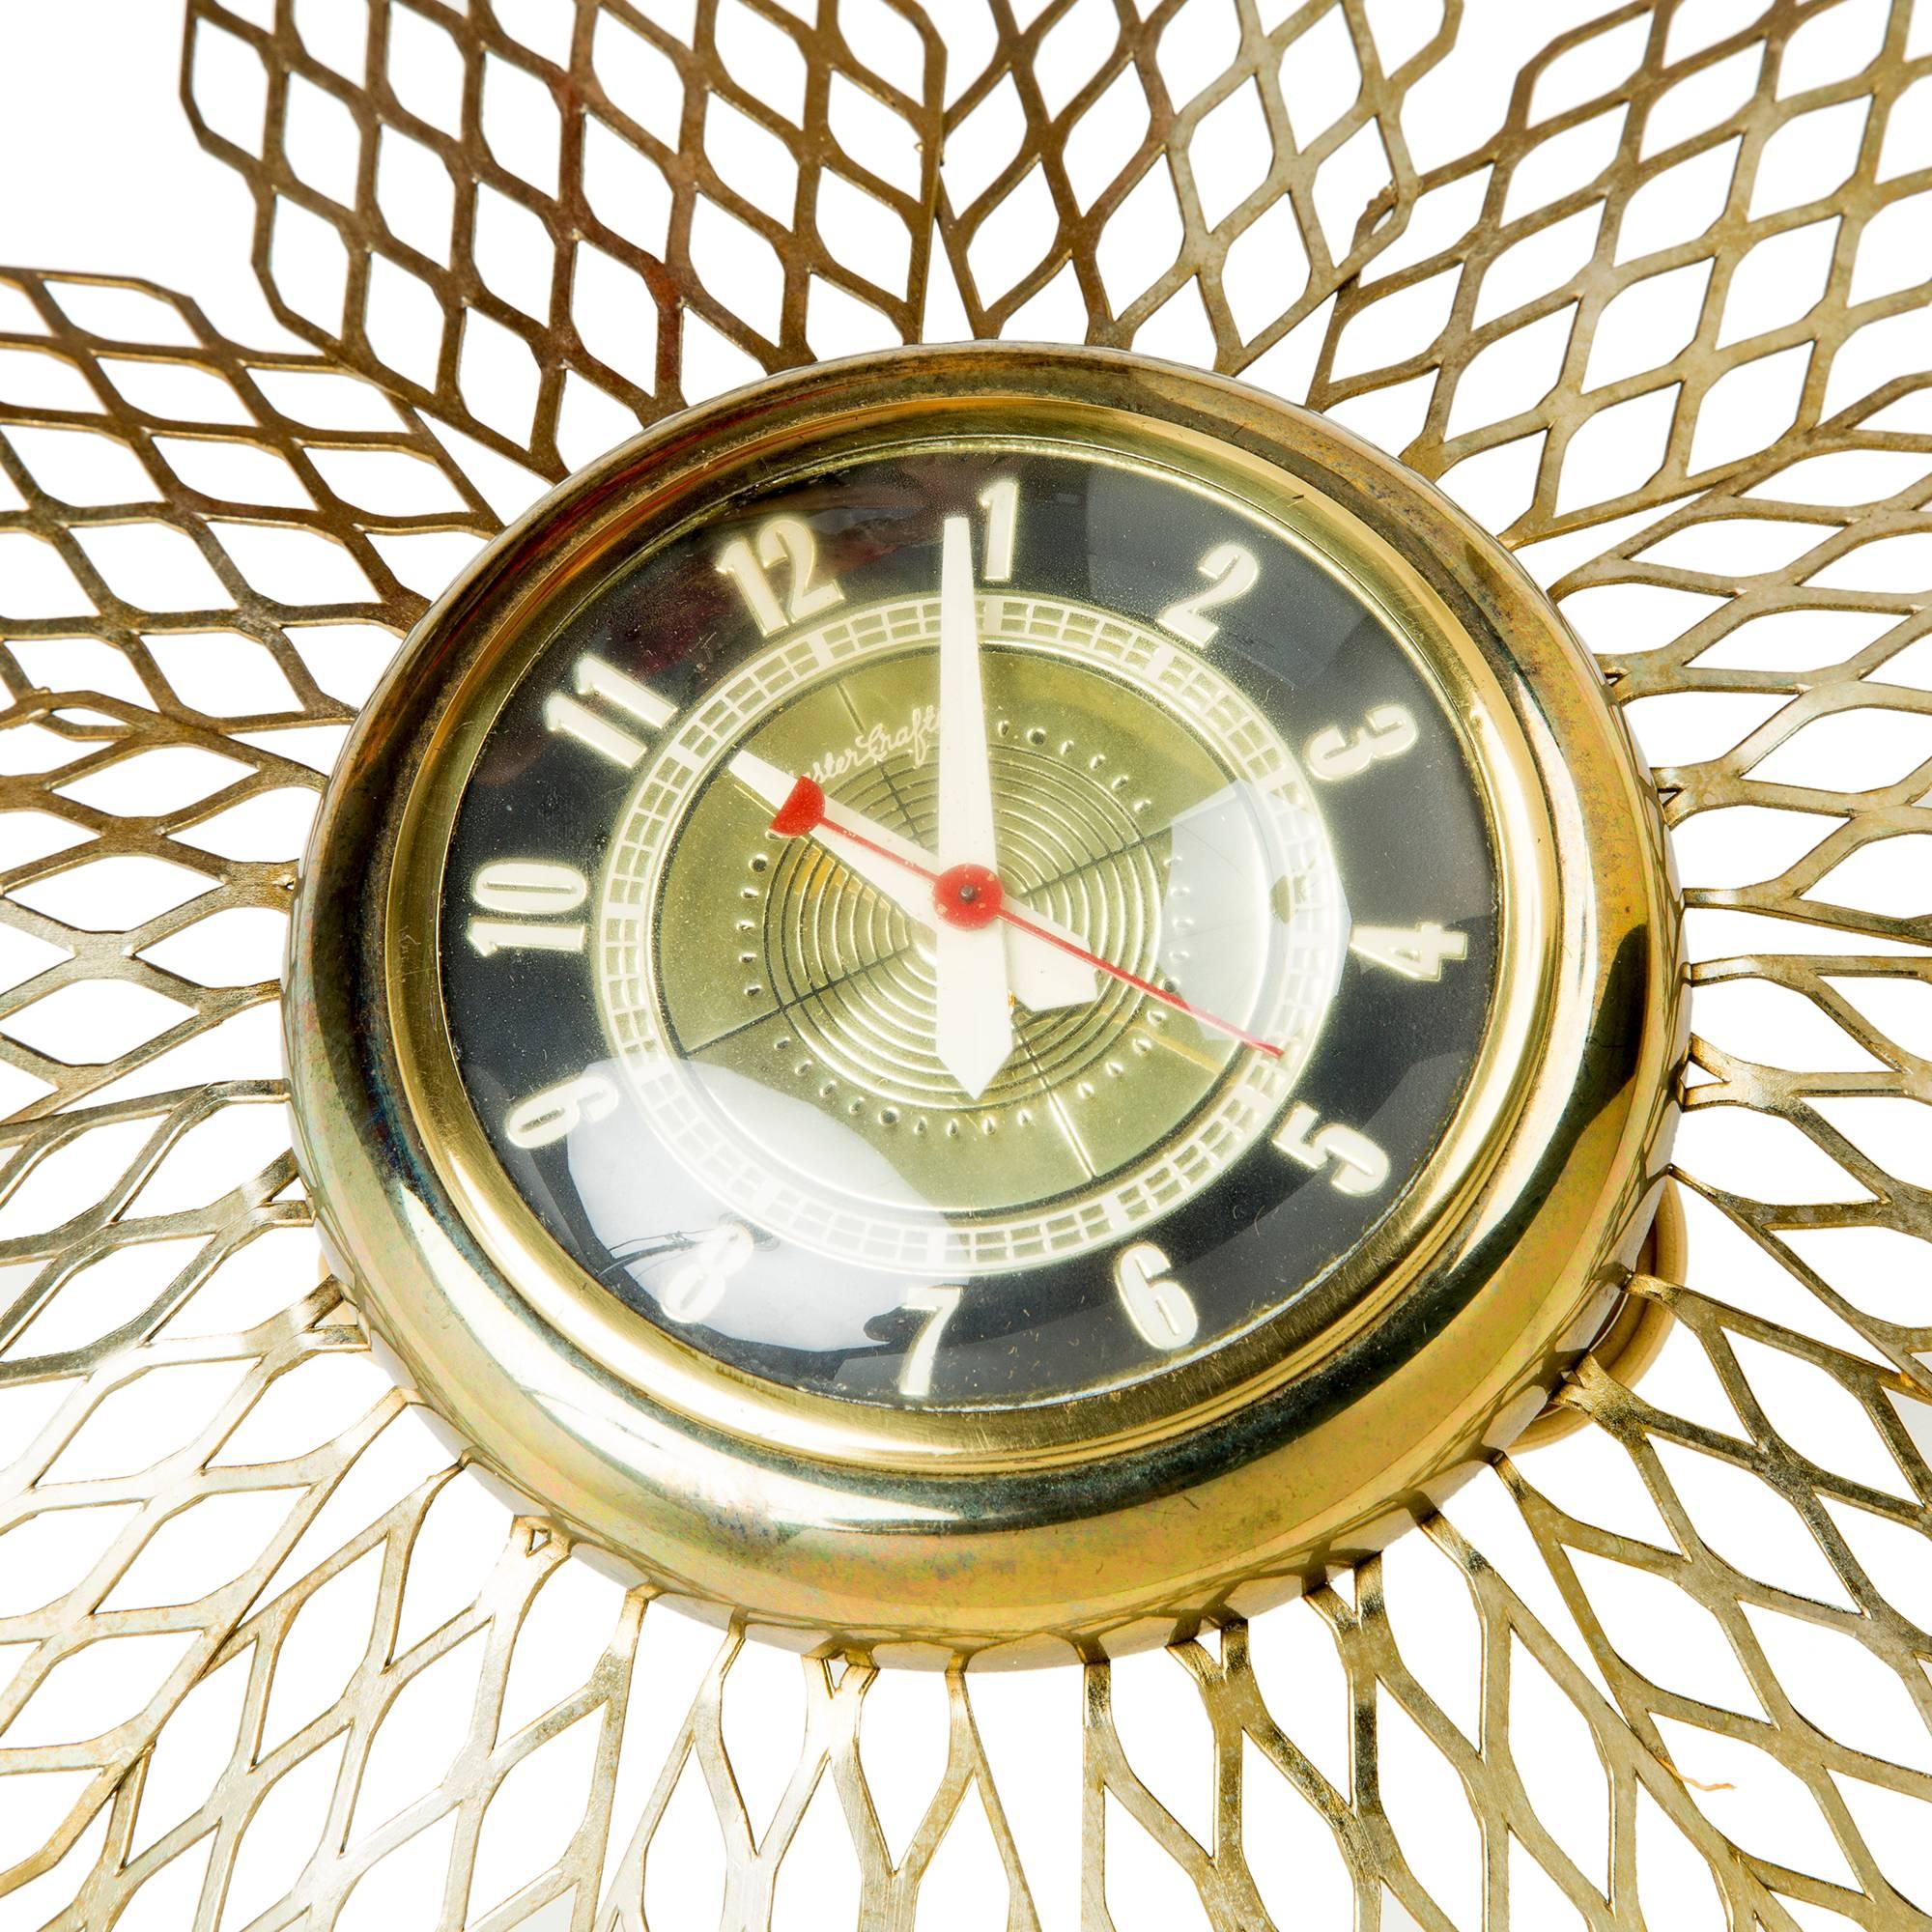 Wonderful starburst clock by Mastercrafters. Featuring cut-out wire detail with a black and brass face and red minute hand. Plugs at the back. We currently have two of these clocks available. 

The archetypal design makes this clock appropriate